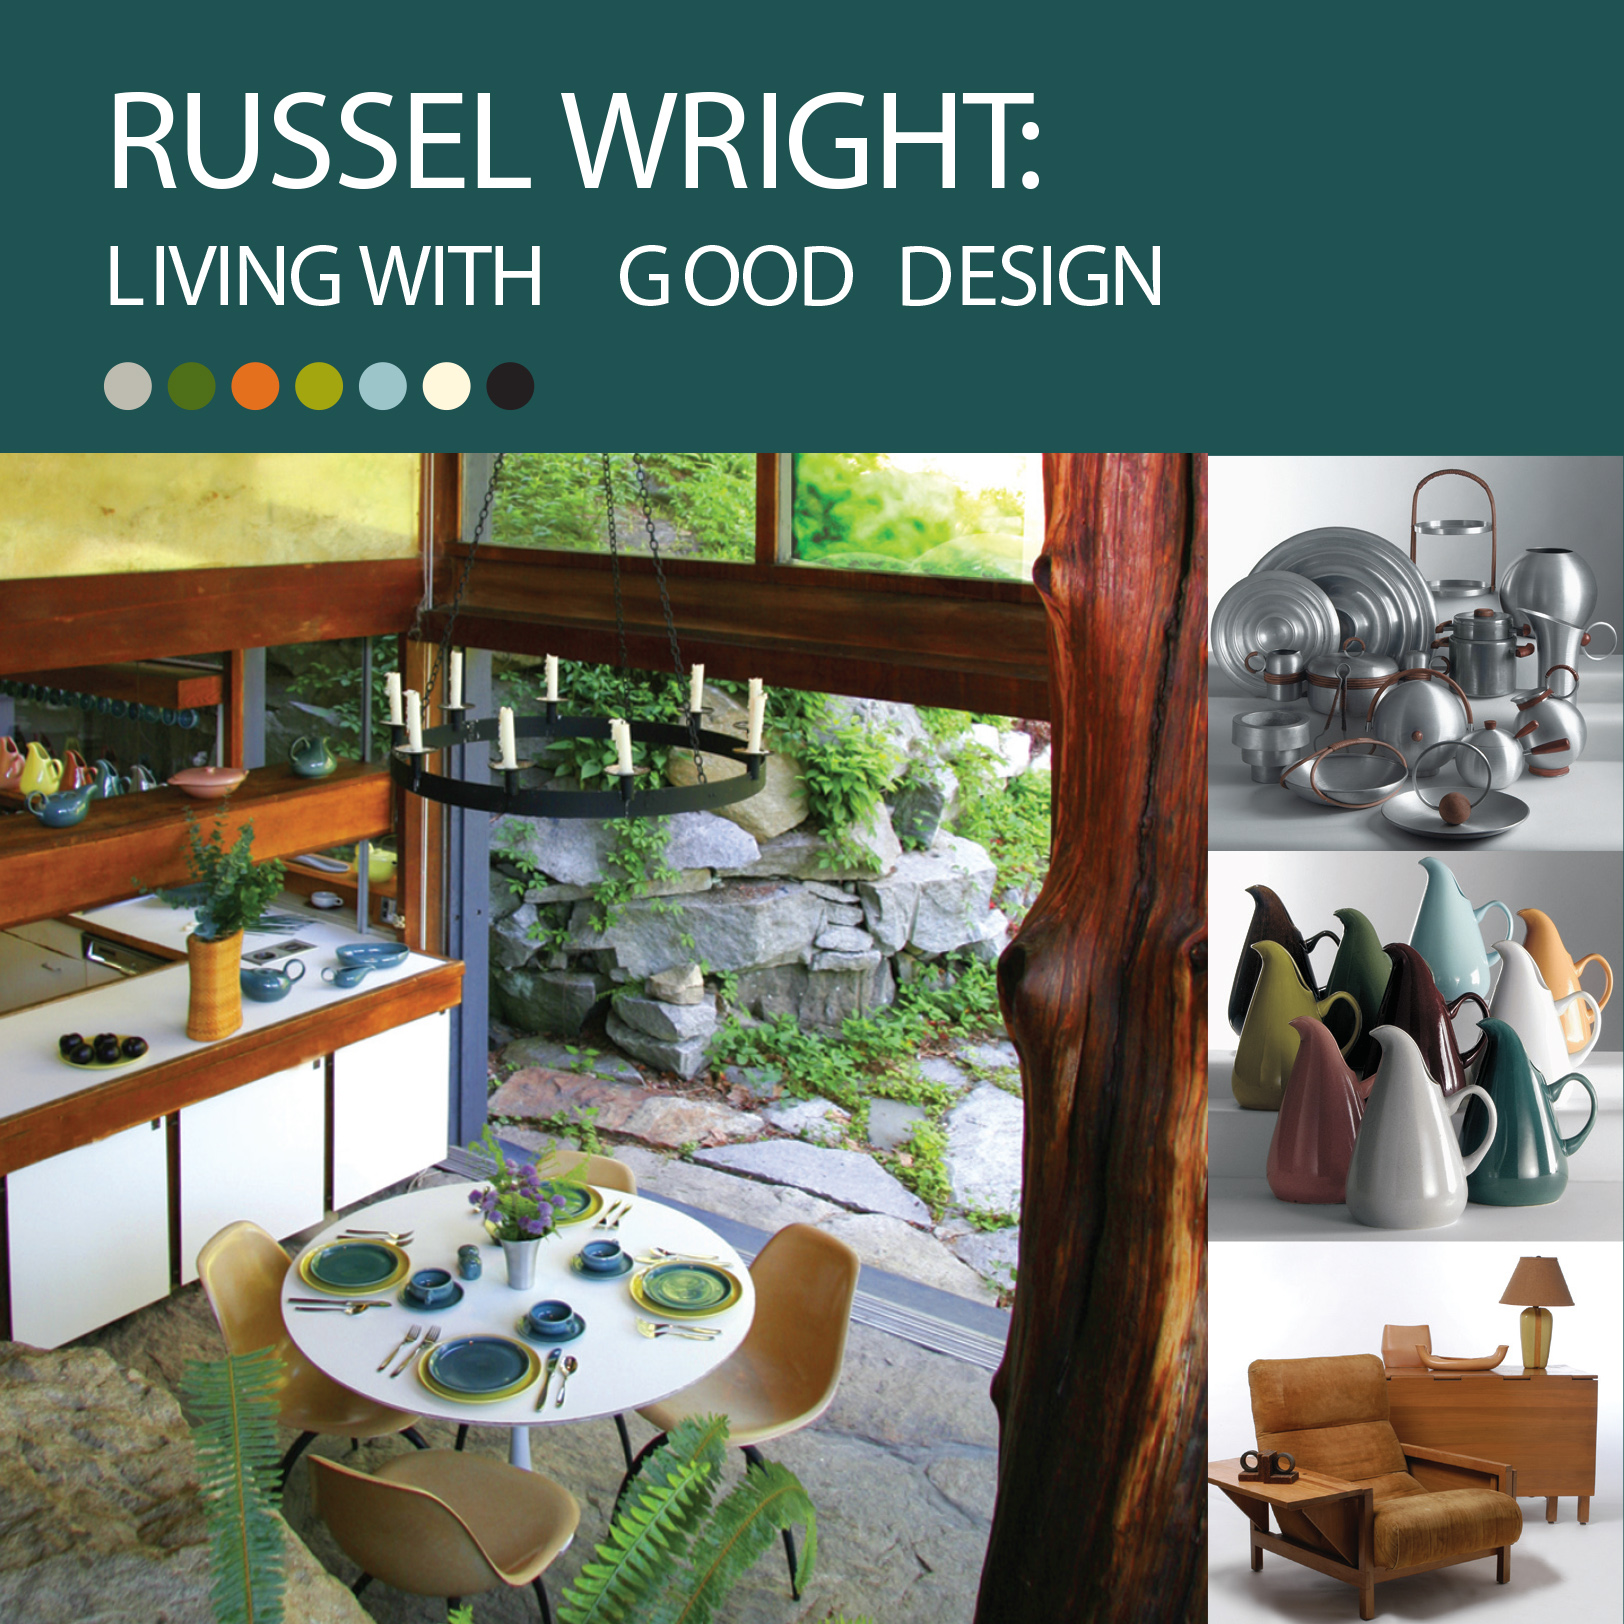 Russel Wright: Living With Good Design